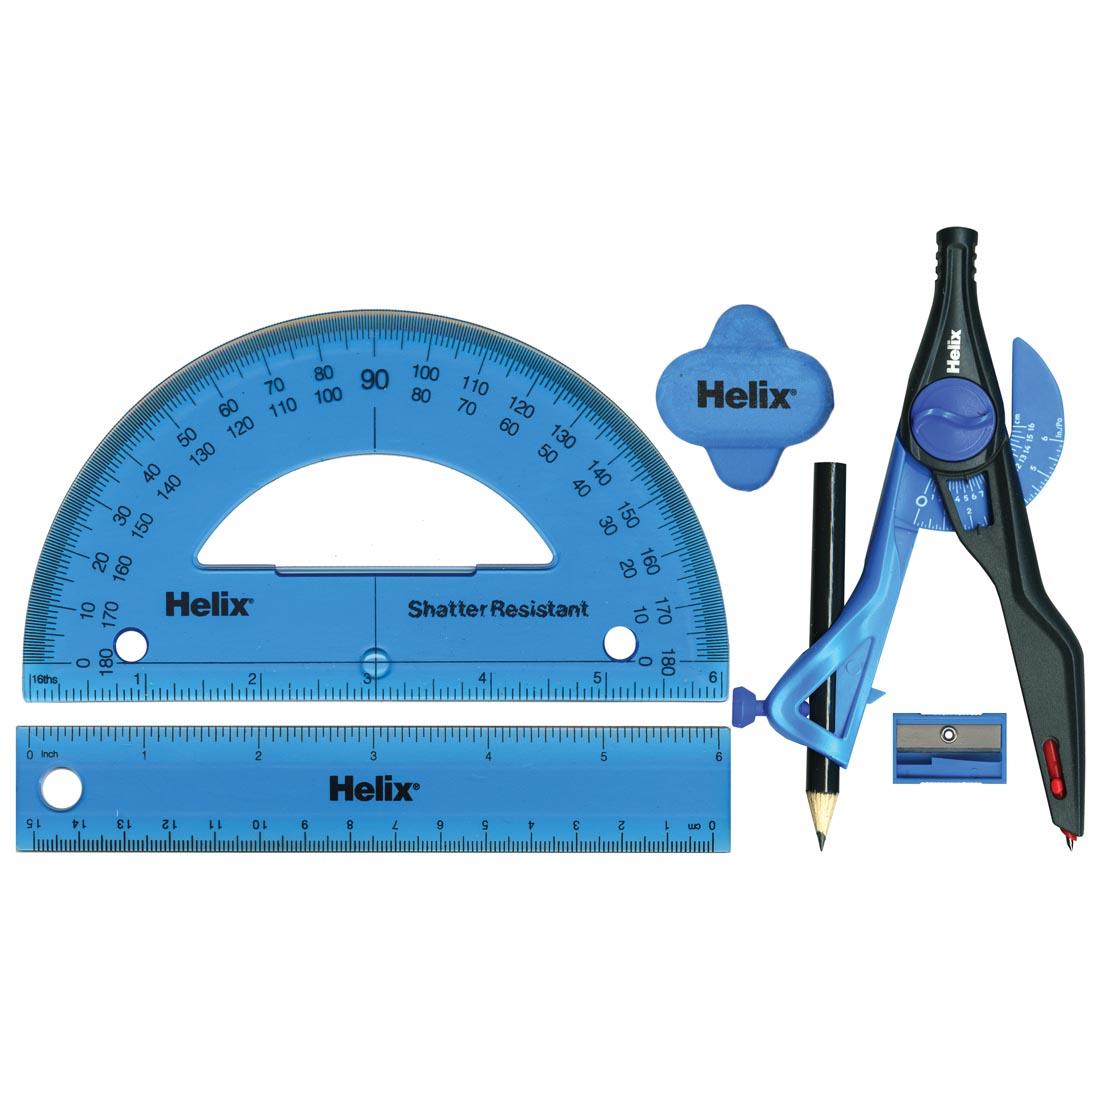 Helix Super School Kit with protractor, ruler, eraser, safety point compass with pencil and pencil sharpener